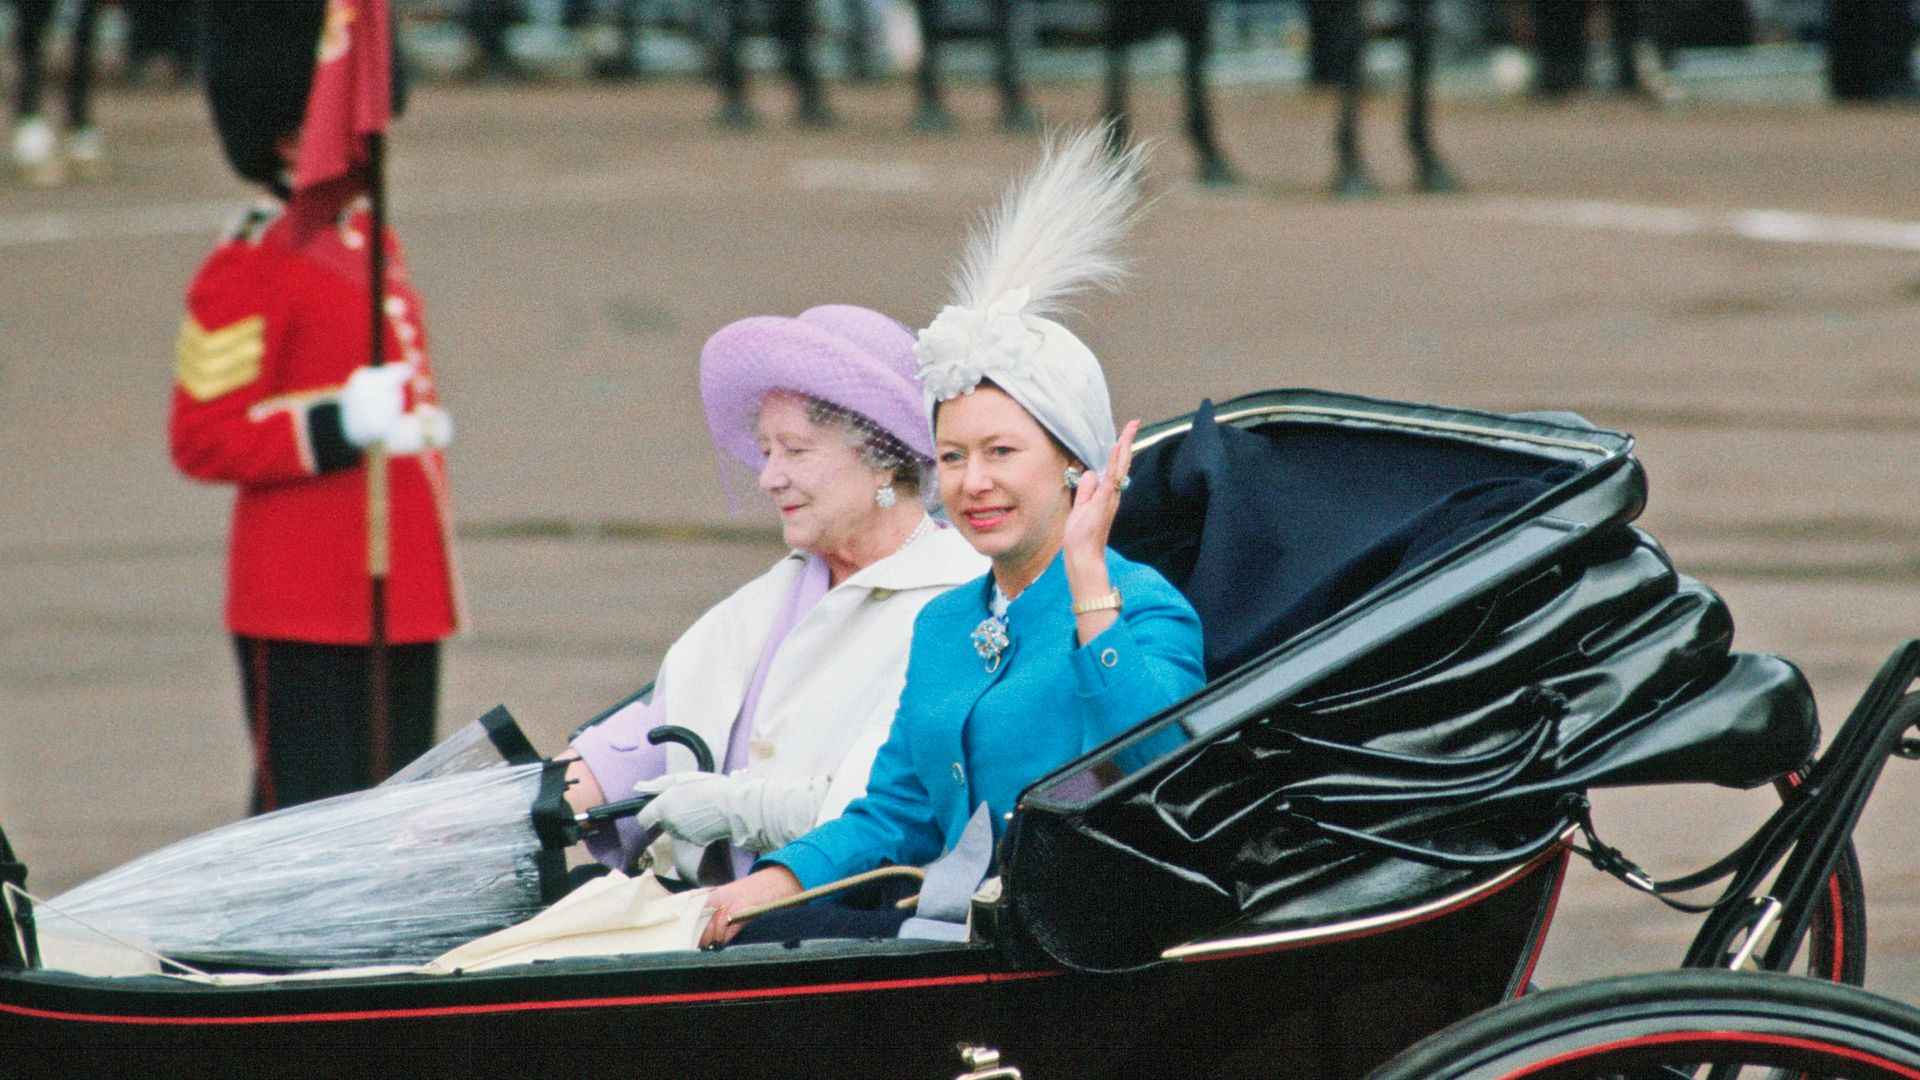 LONDON, UNITED KINGDOM - JUNE 12:  Princess Margaret And The Queen Mother In A Carriage At Trooping The Colour.  (Photo by Tim Graham Photo Library via Getty Images)